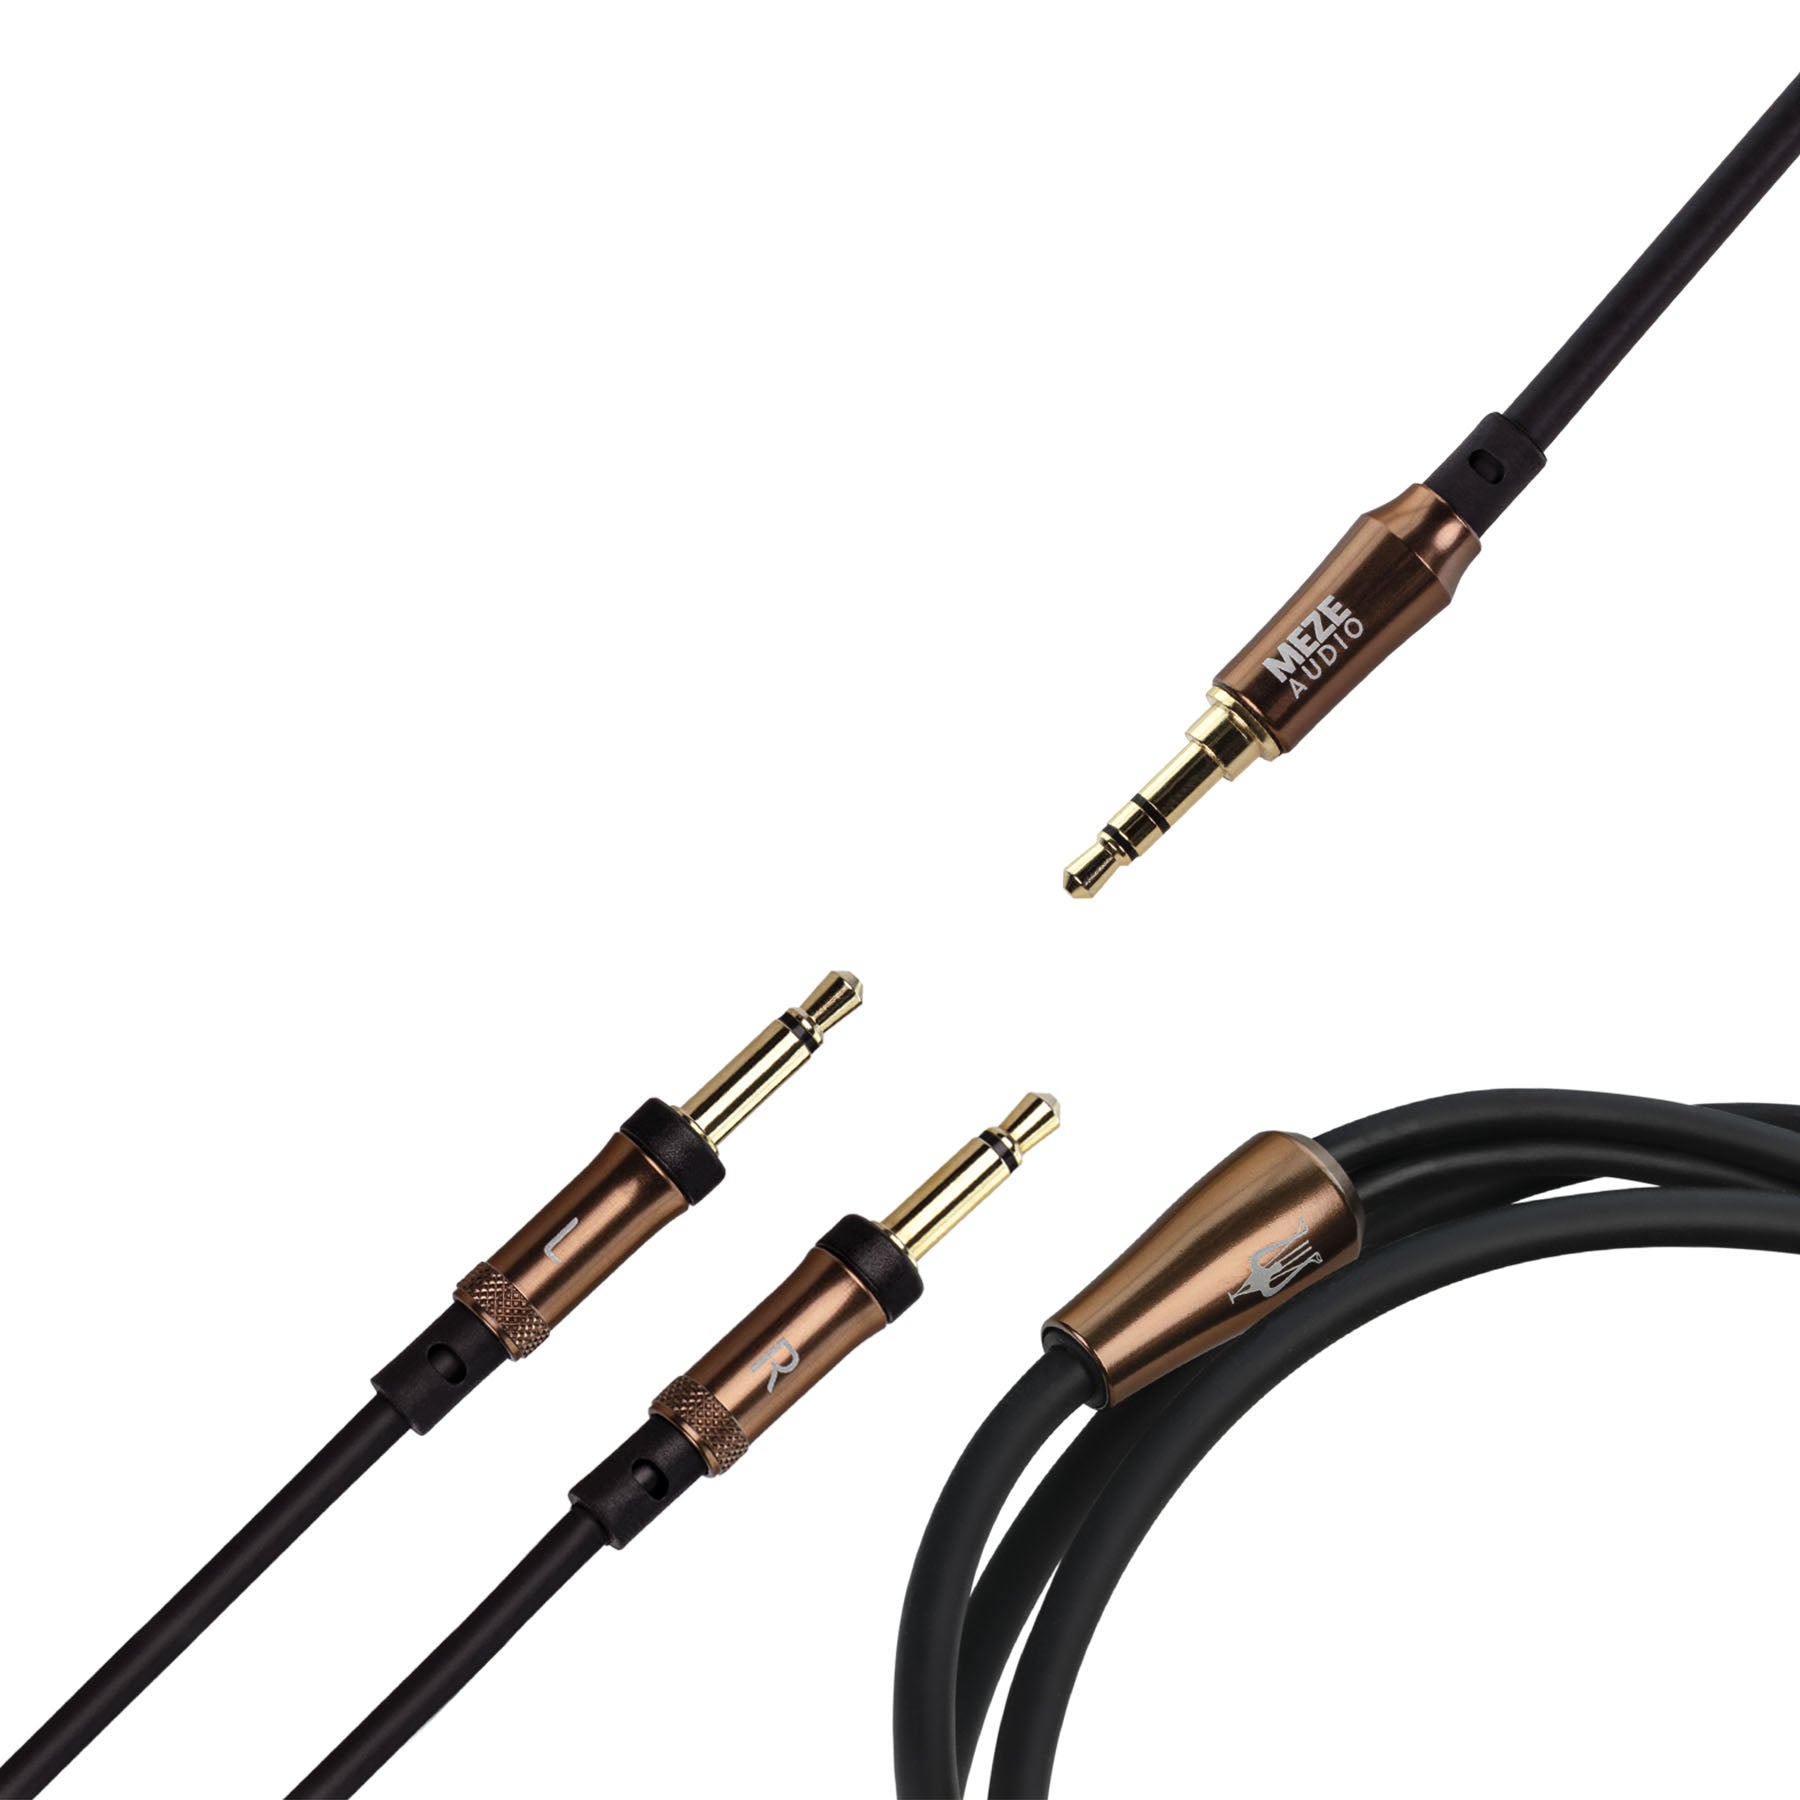 Meze Audio 3.5mm to 3.5mm Pro Standard Cable with Copper Aluminum Casings